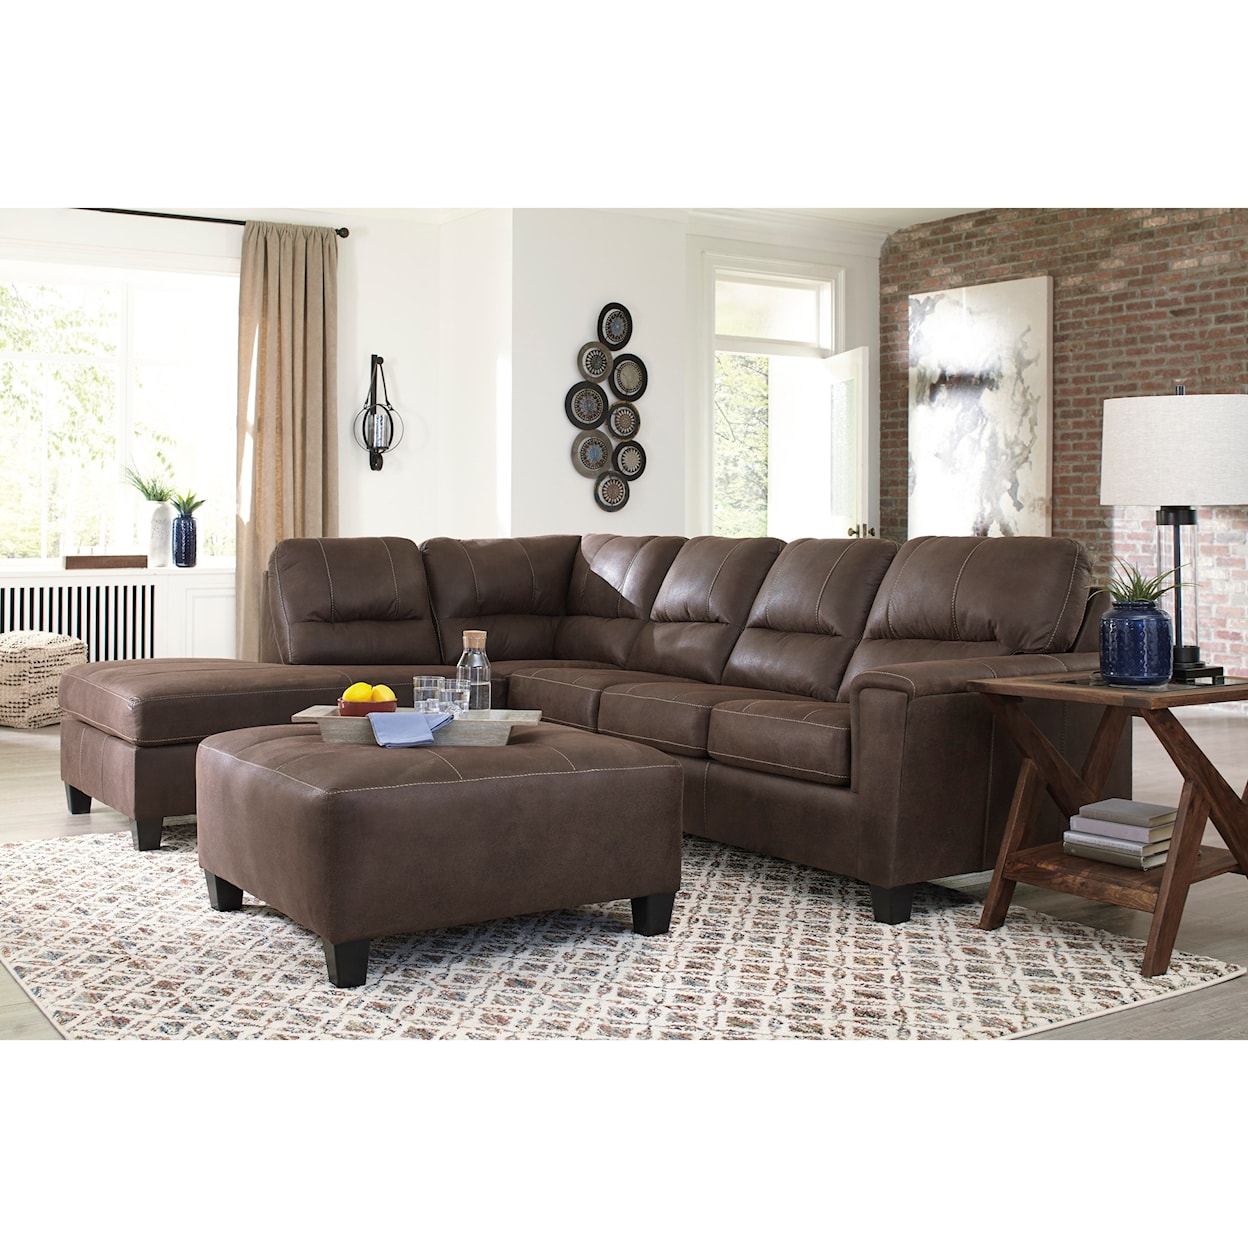 Signature Design by Ashley Navi 2pc Sectional and ottoman